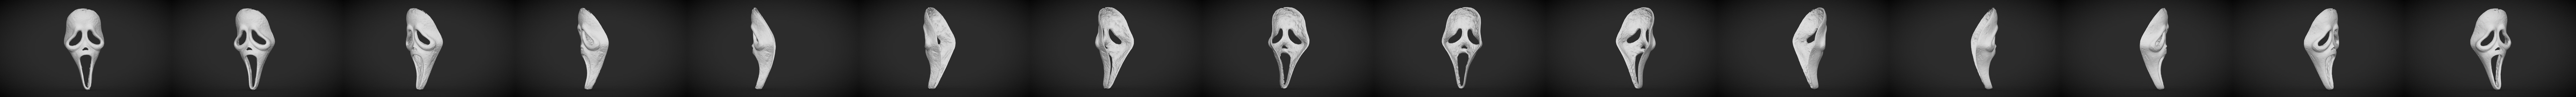 Scream Mask: Over 3,204 Royalty-Free Licensable Stock Vectors & Vector Art